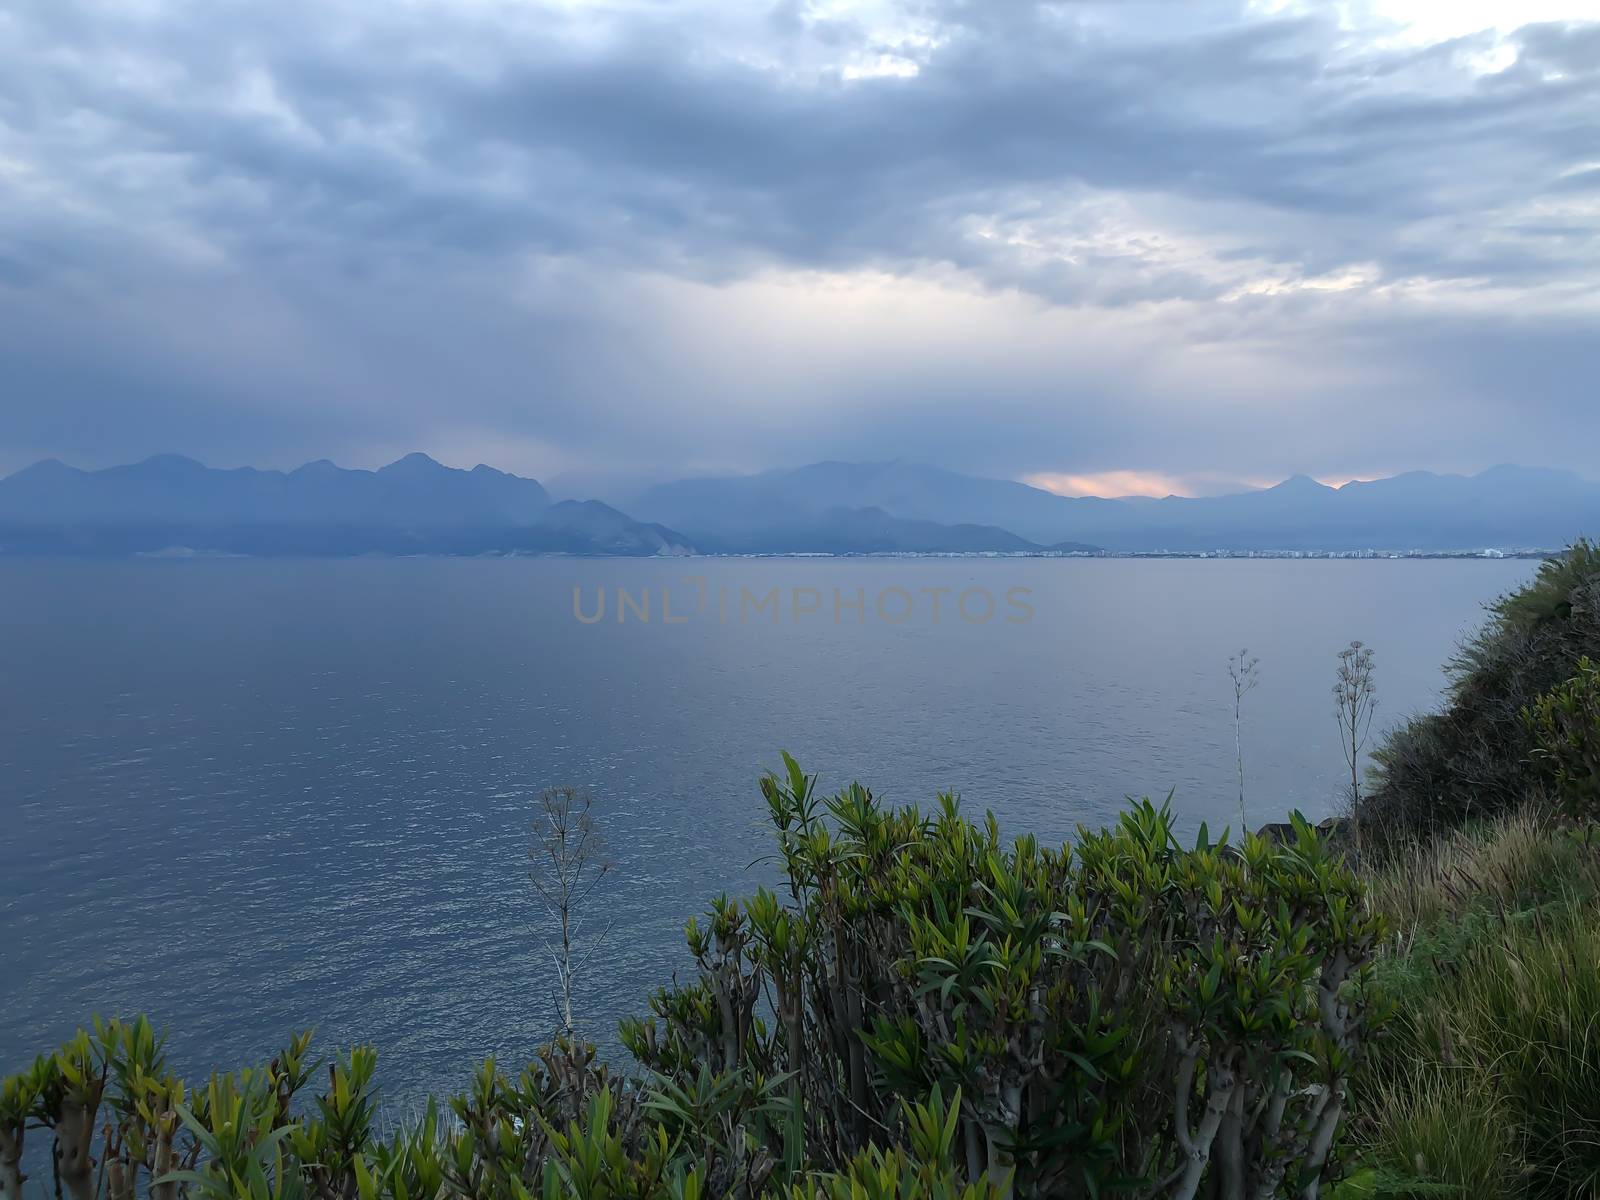 Landscape of Mediterranean sea mountains and blue sky in Antalya